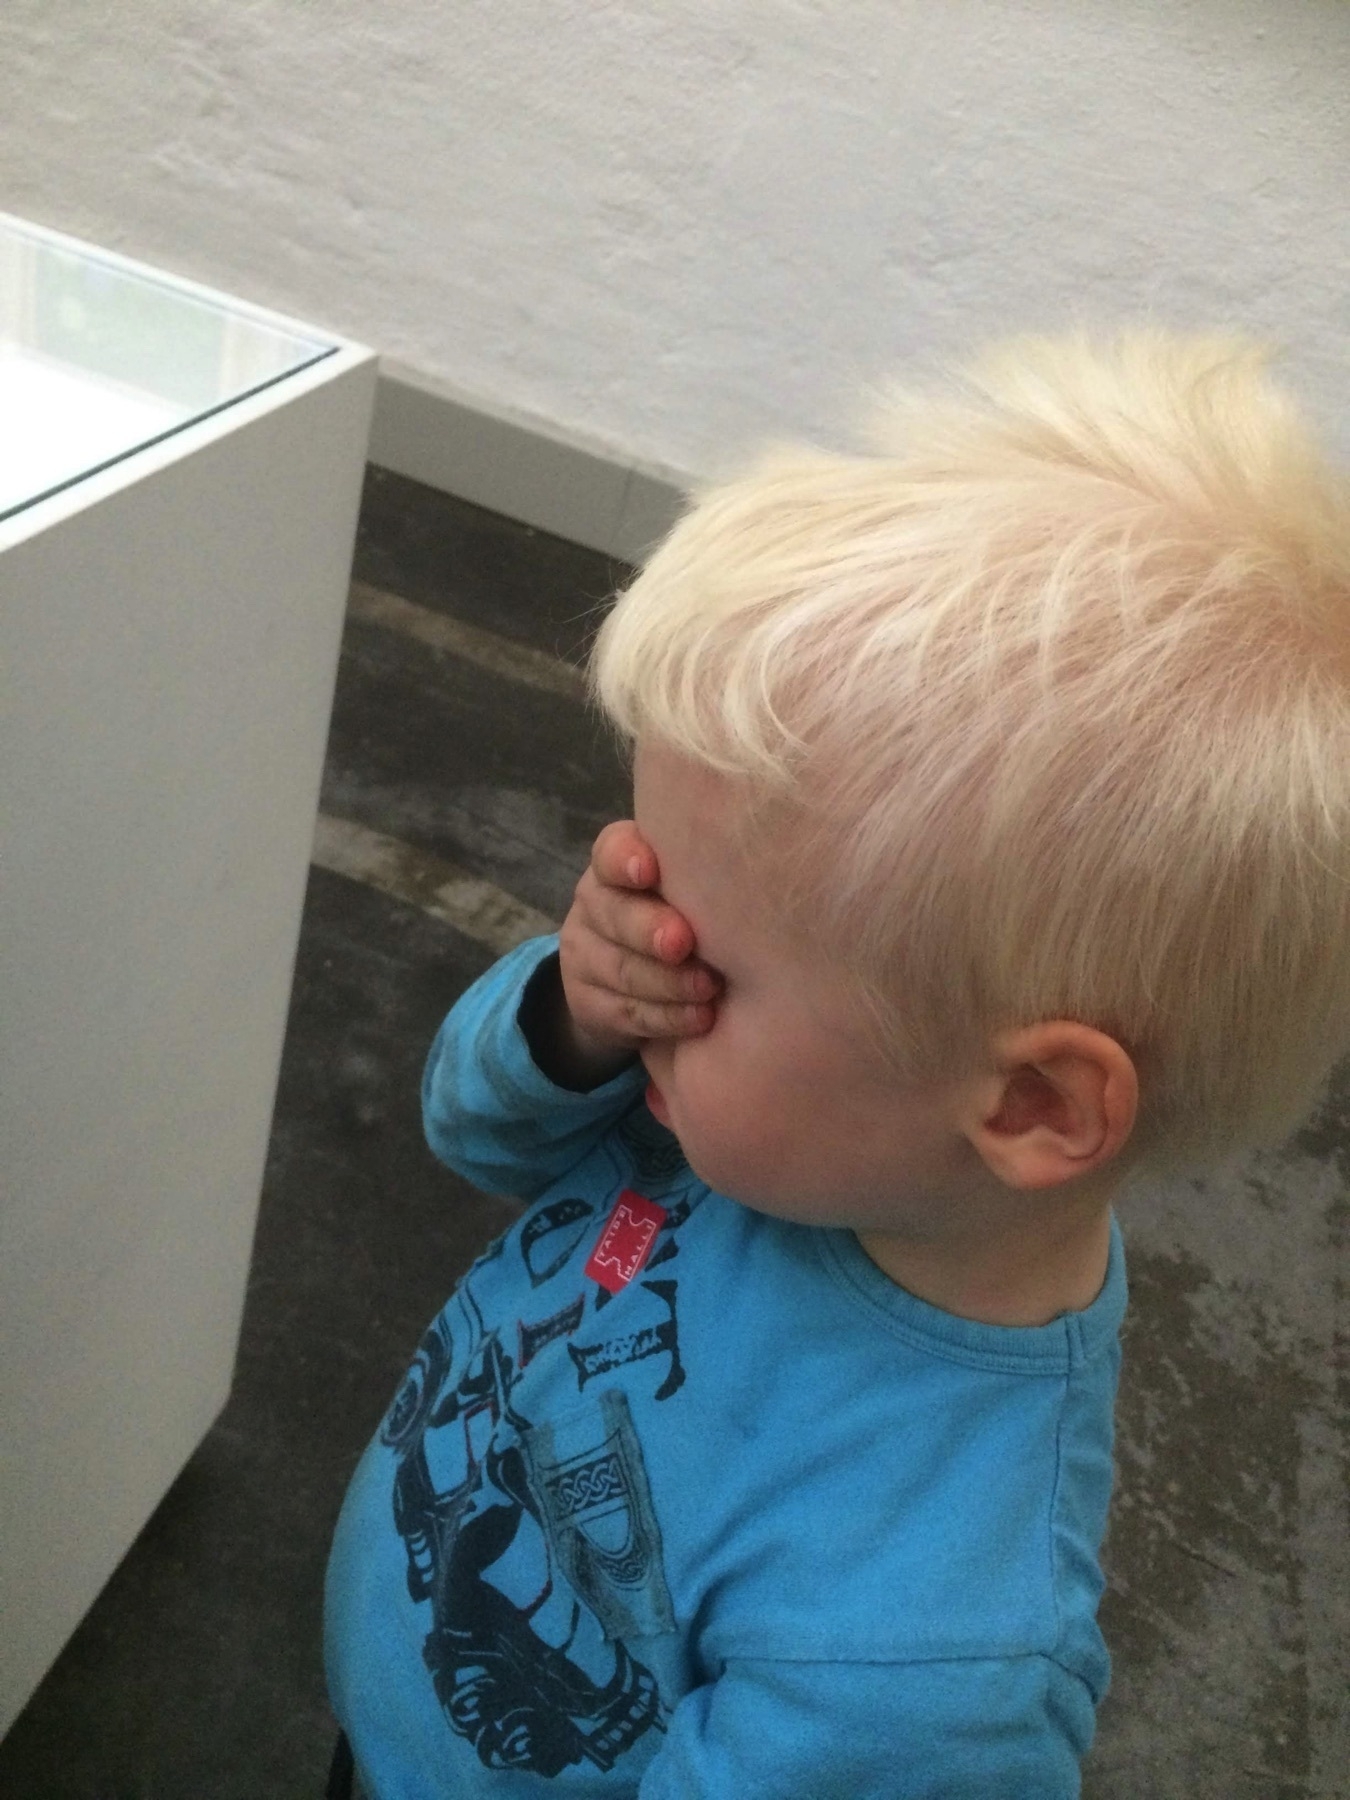 boy, three years old standing by a art piece blocking his eyes with a hand. looking unhappy